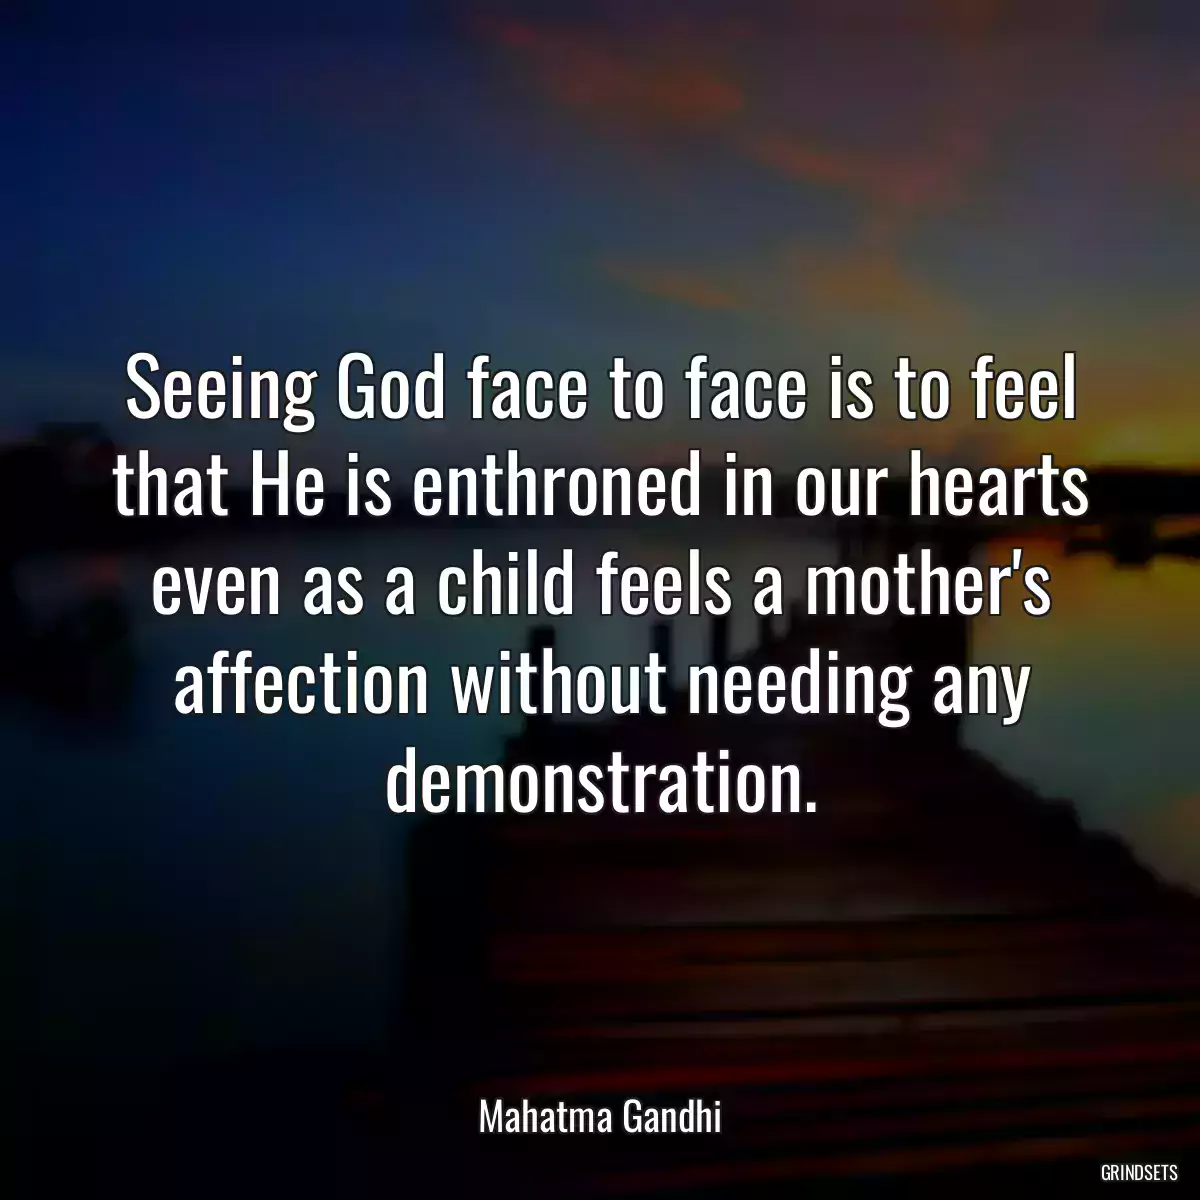 Seeing God face to face is to feel that He is enthroned in our hearts even as a child feels a mother\'s affection without needing any demonstration.